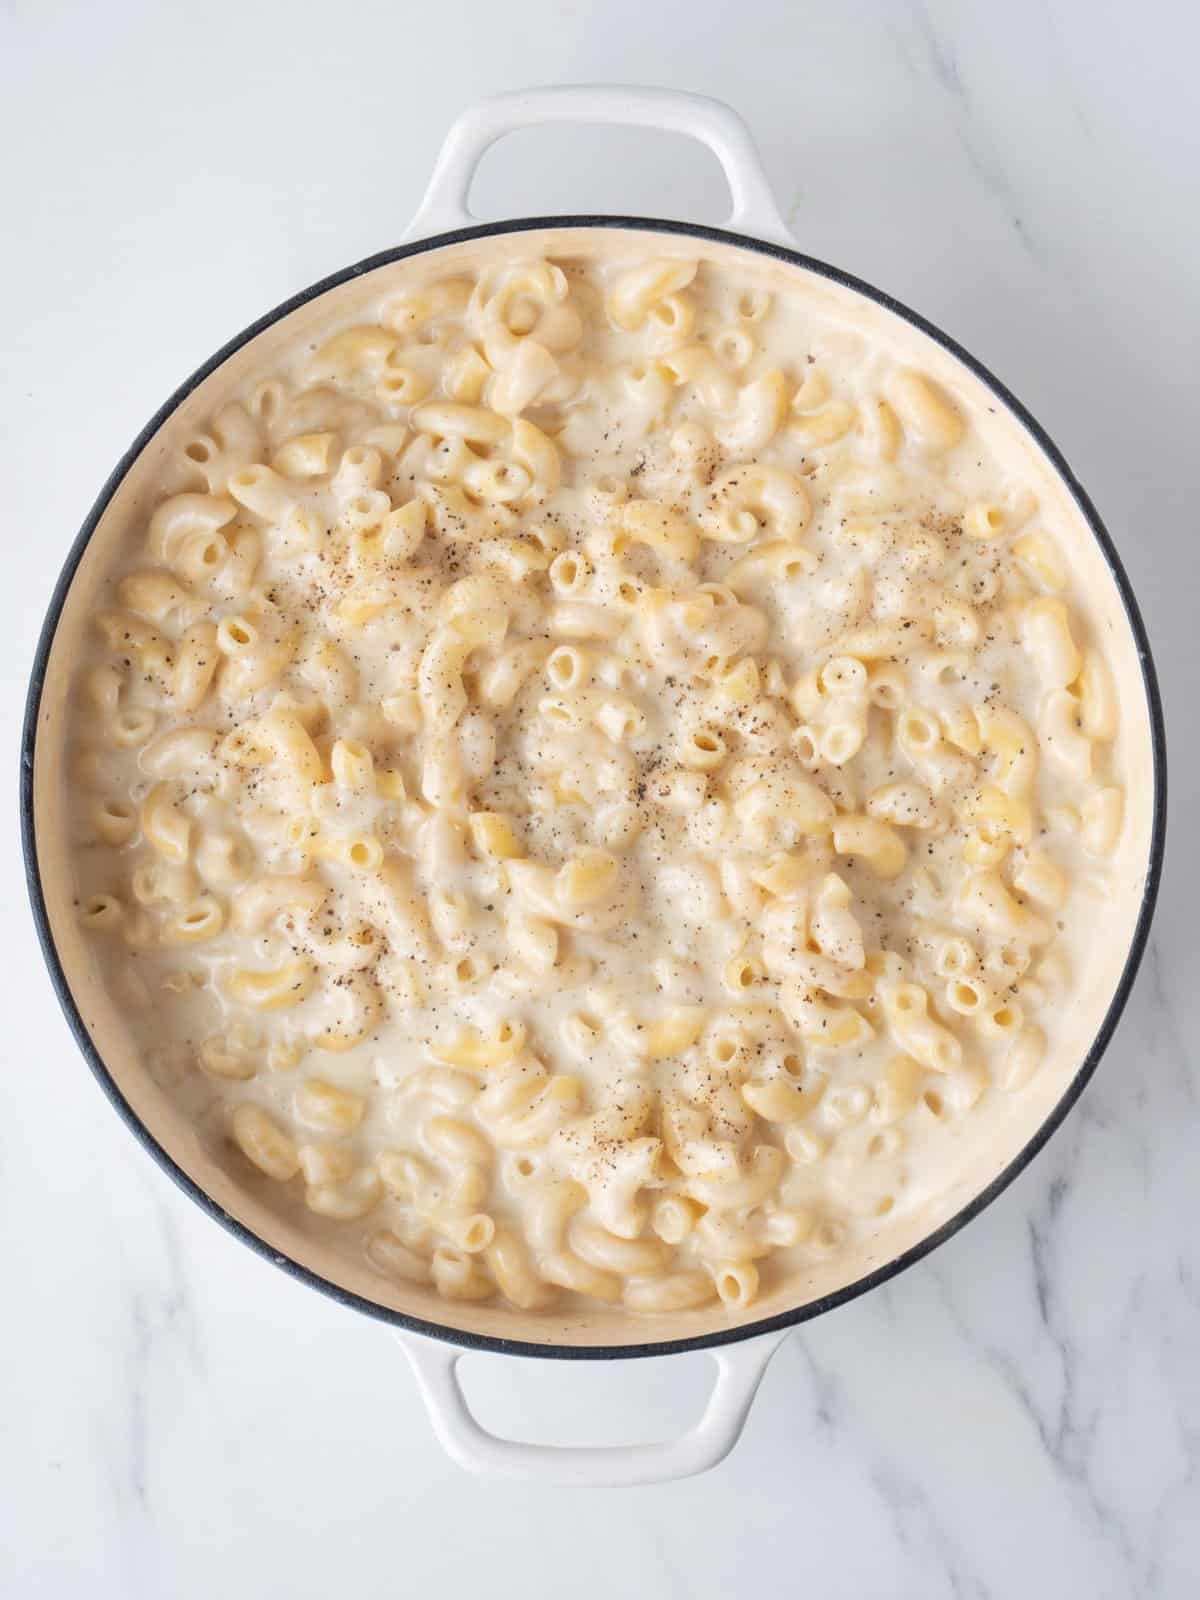 This gooey mac & cheese looks ✨grate✨. 🧀 Easily go from stove